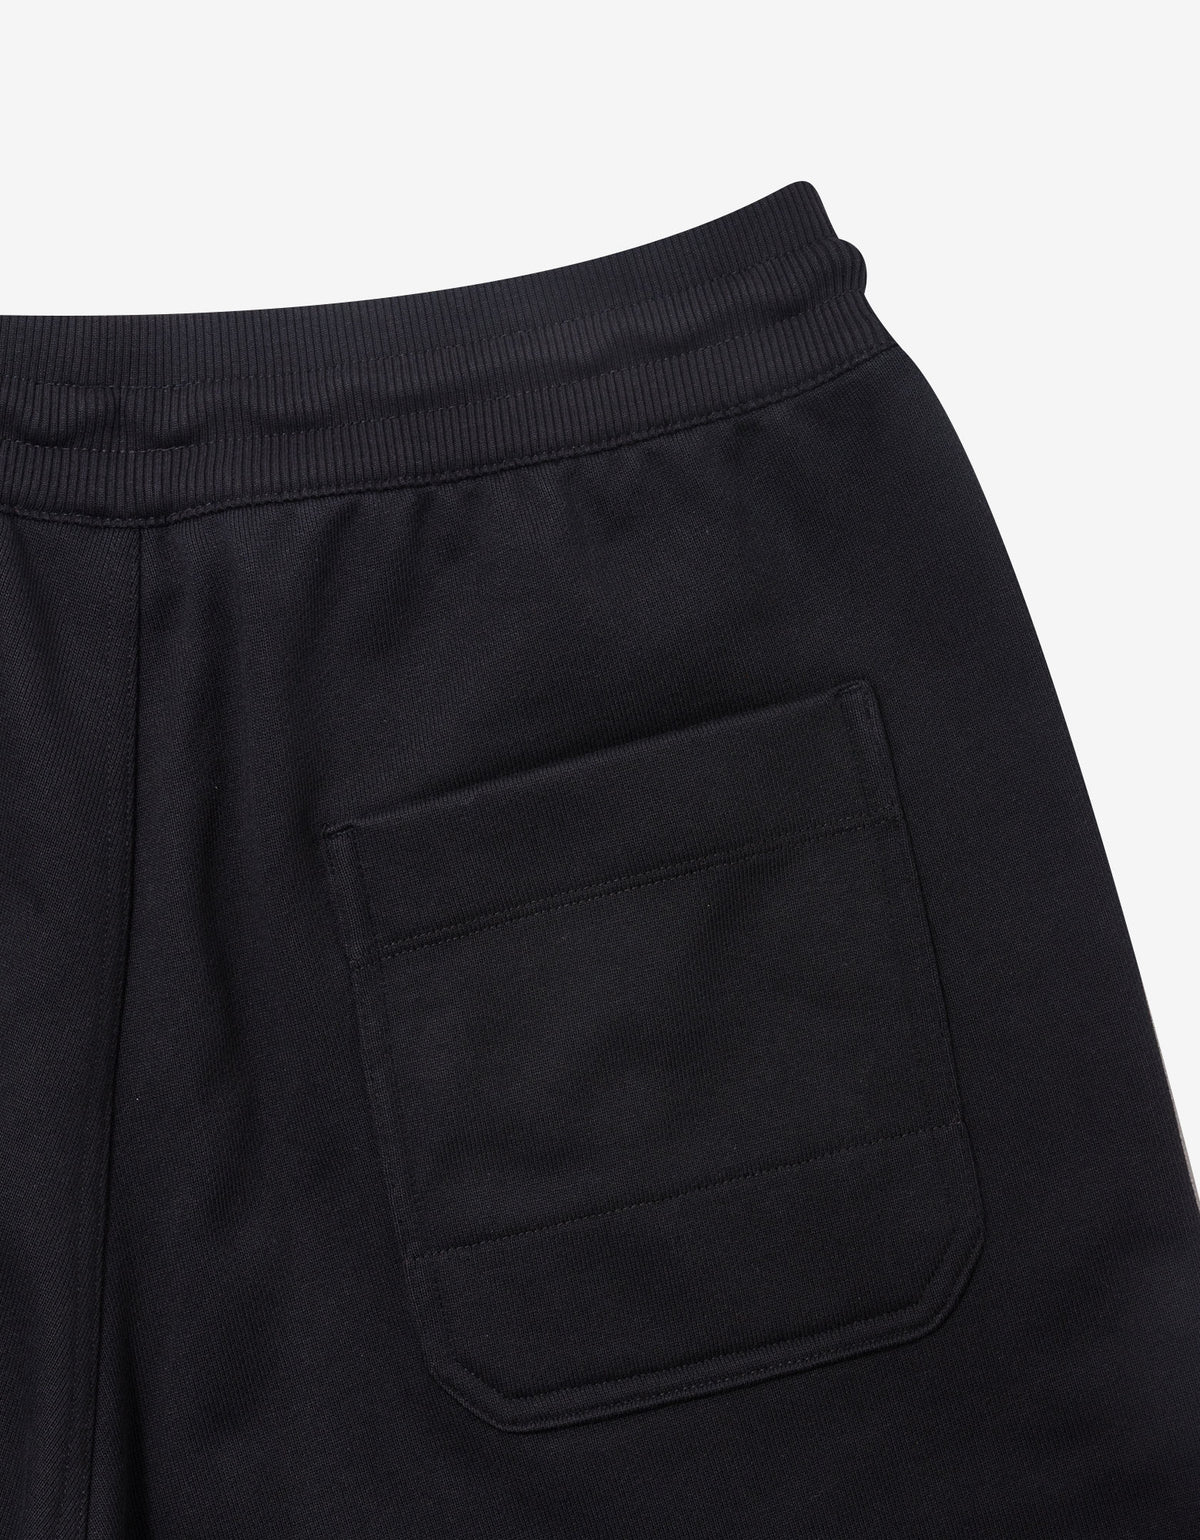 Y-3 Black Placed Graphic Sweat Shorts